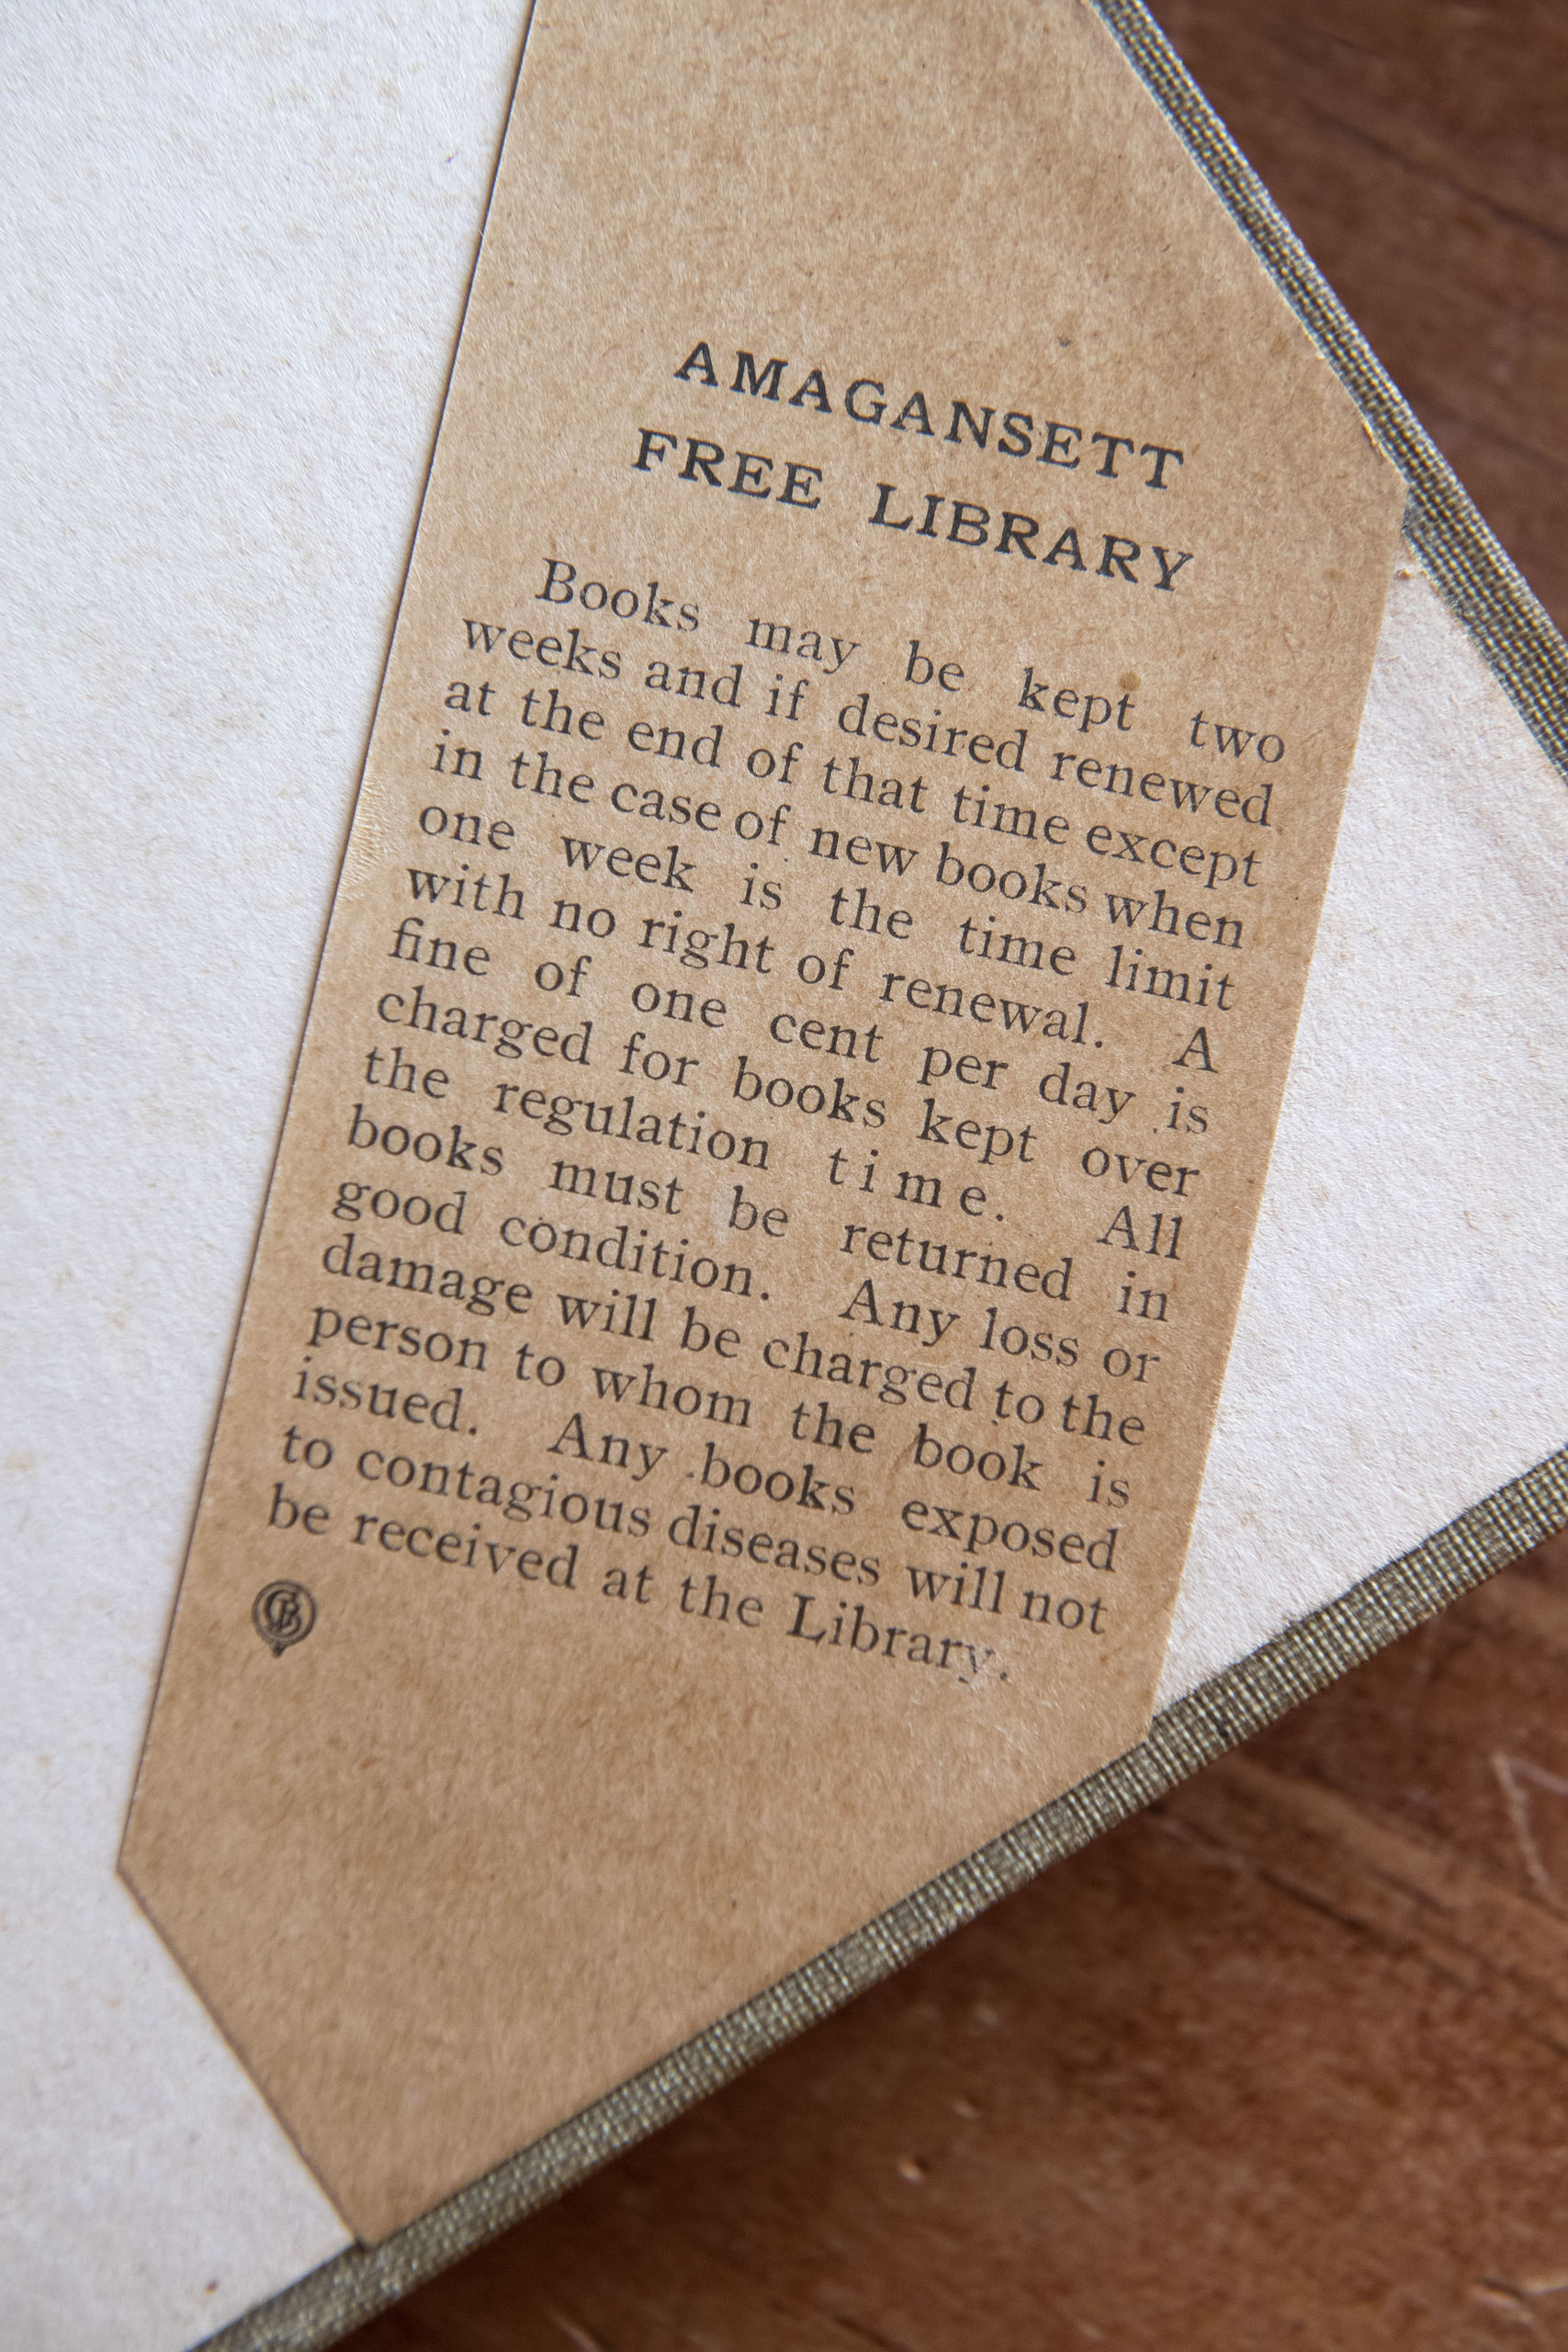 The library policy that was in place when the book was last in circulation.